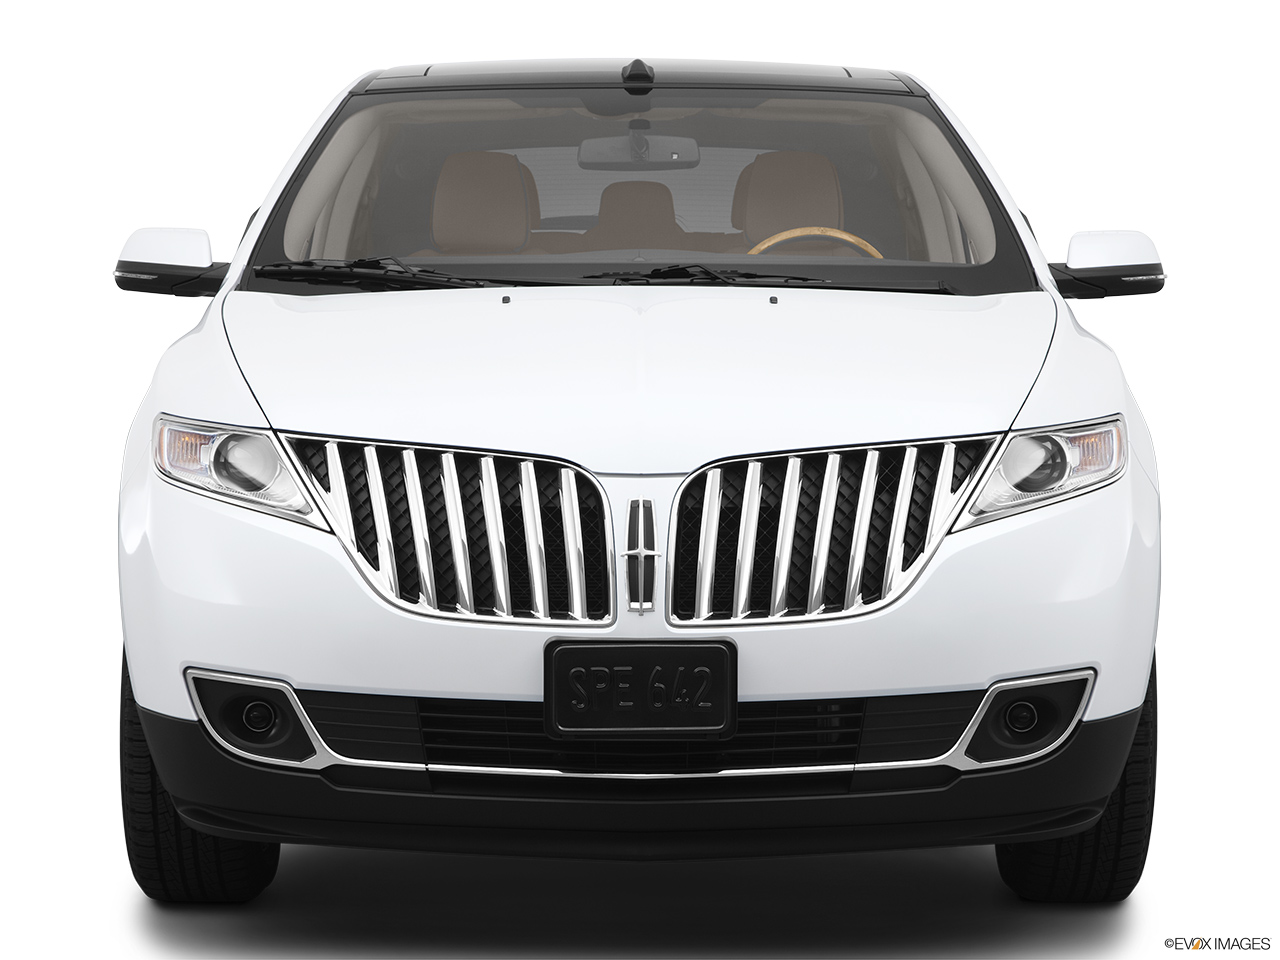 2013 Lincoln MKX FWD Low/wide front. 